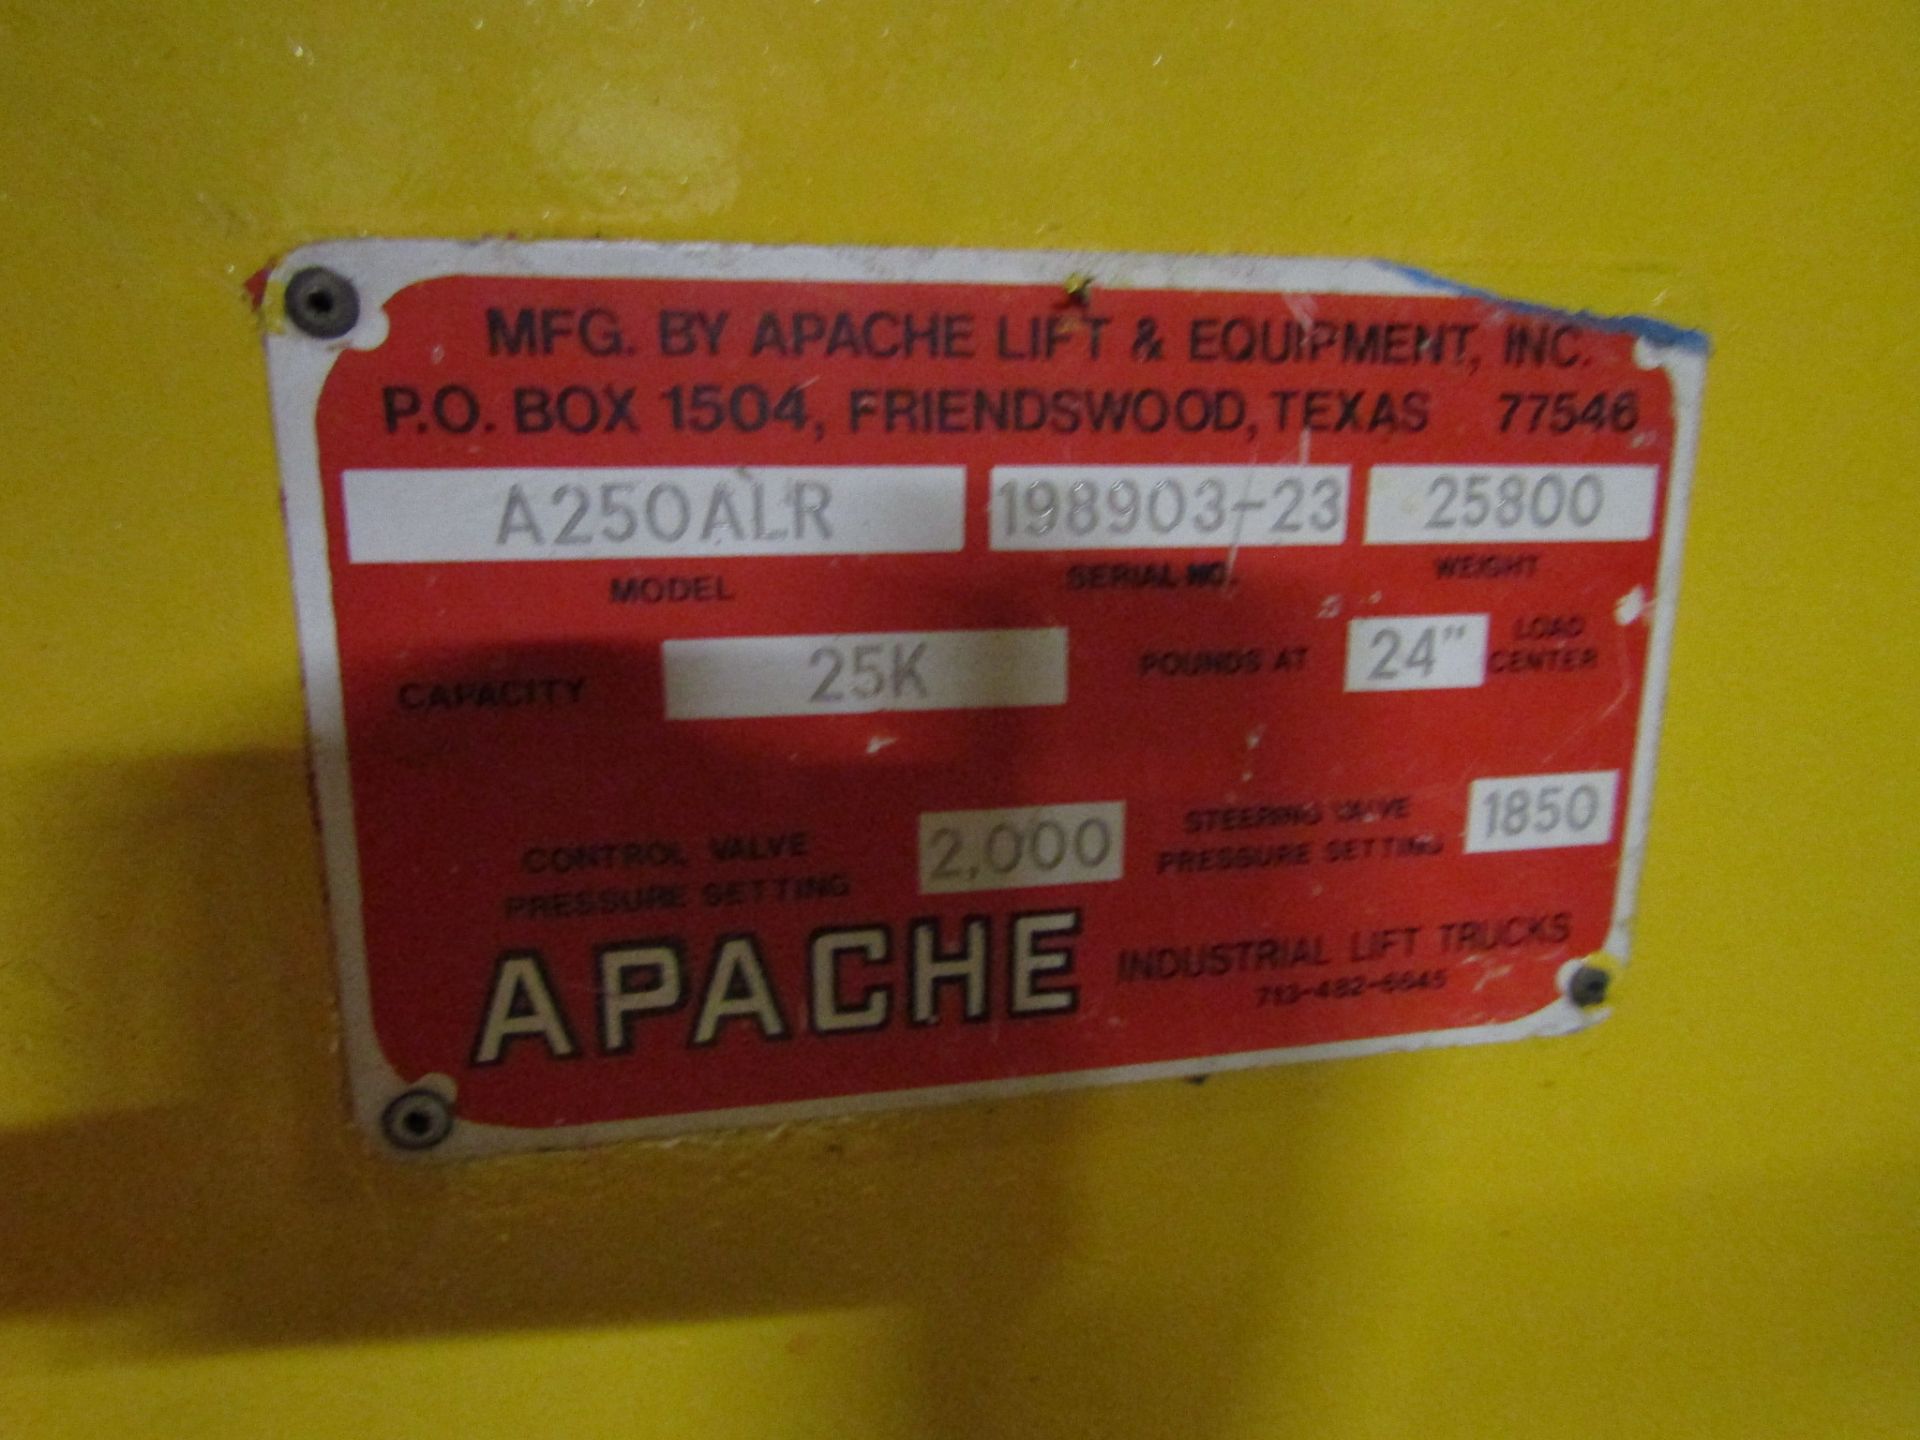 Apache 25000lbs Capacity Forklift - LPG (propane) (no propane tank included) - Image 3 of 3